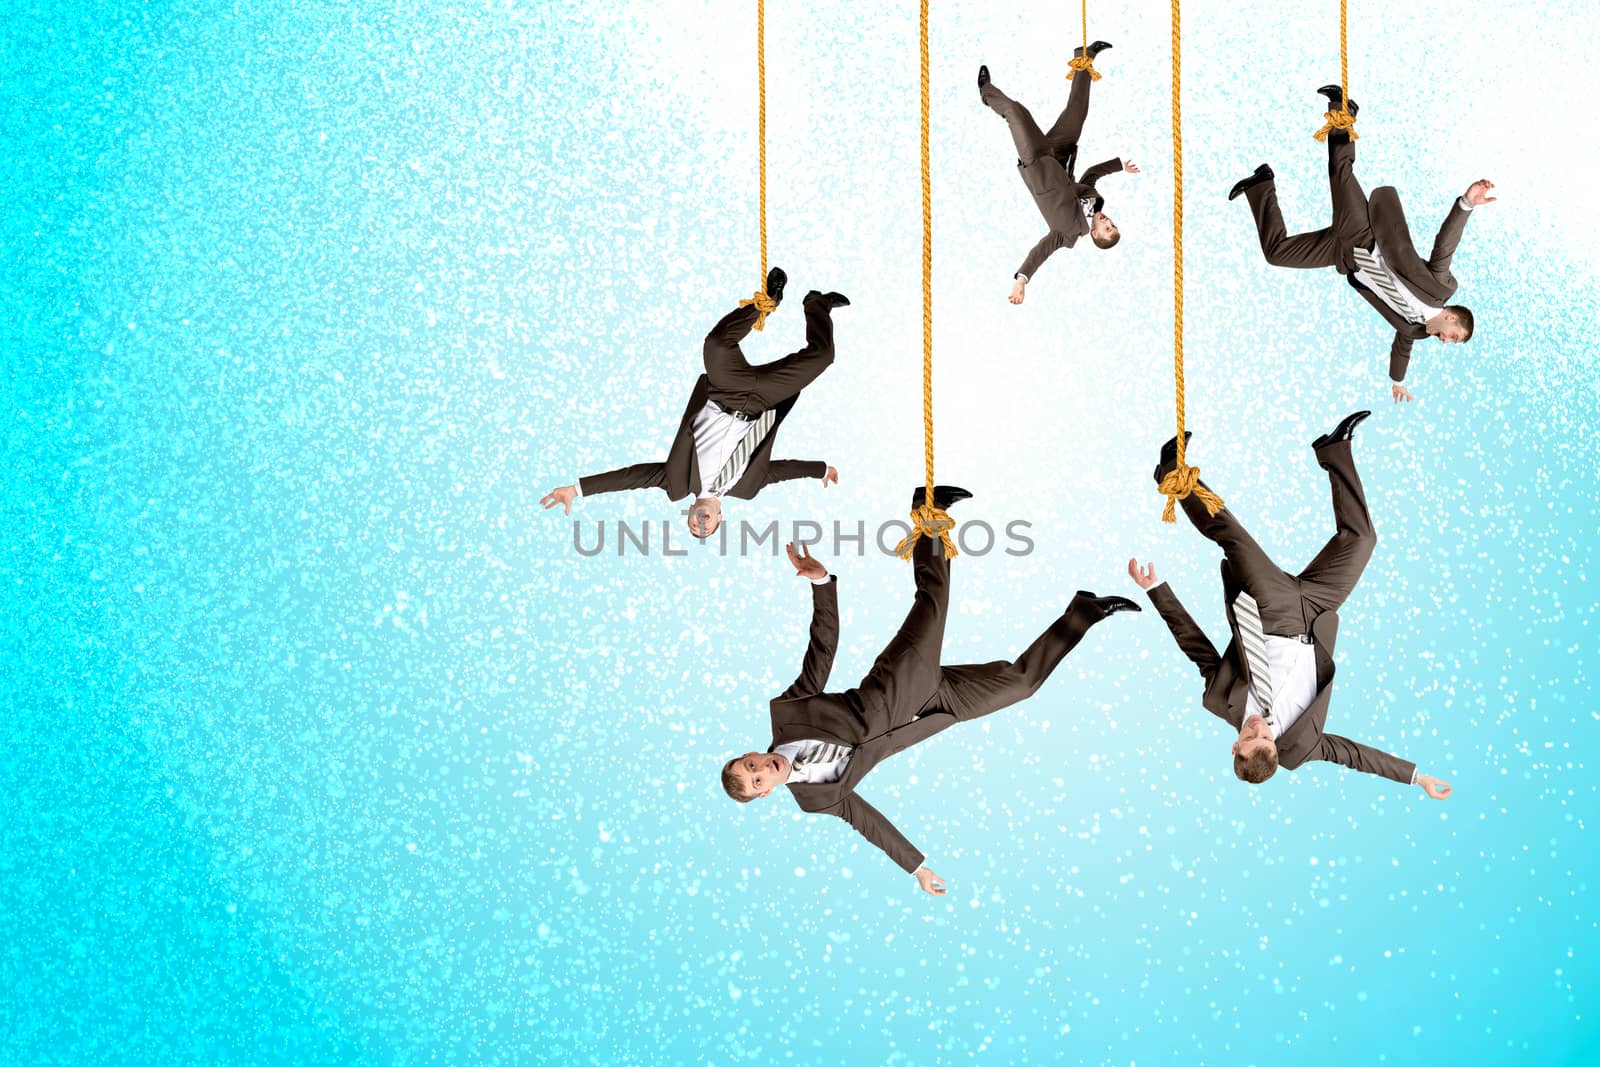 Businessmen hanging on ropes, place image of your product underneath them